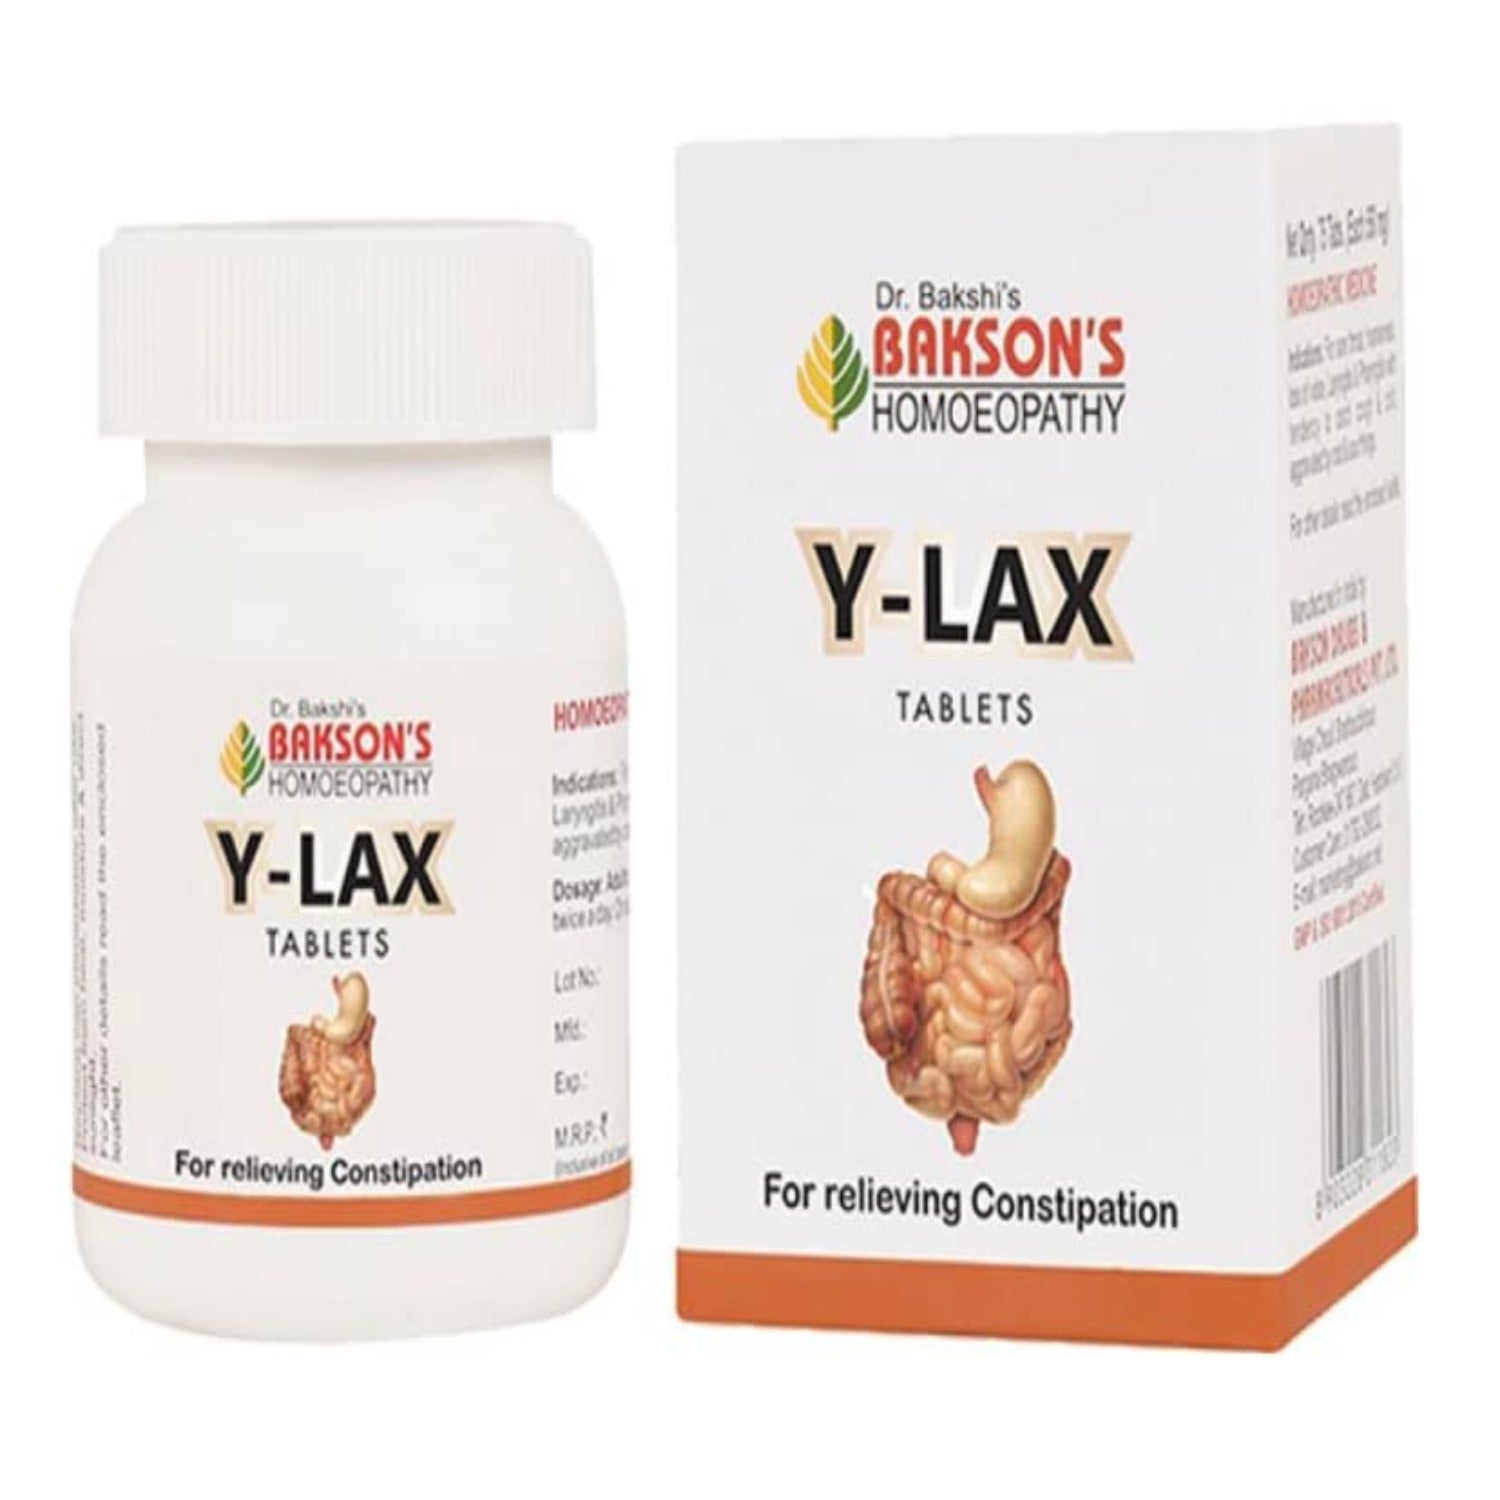 Bakson's Homoeopathy Y-Lax For Relieving Constipation Tablet